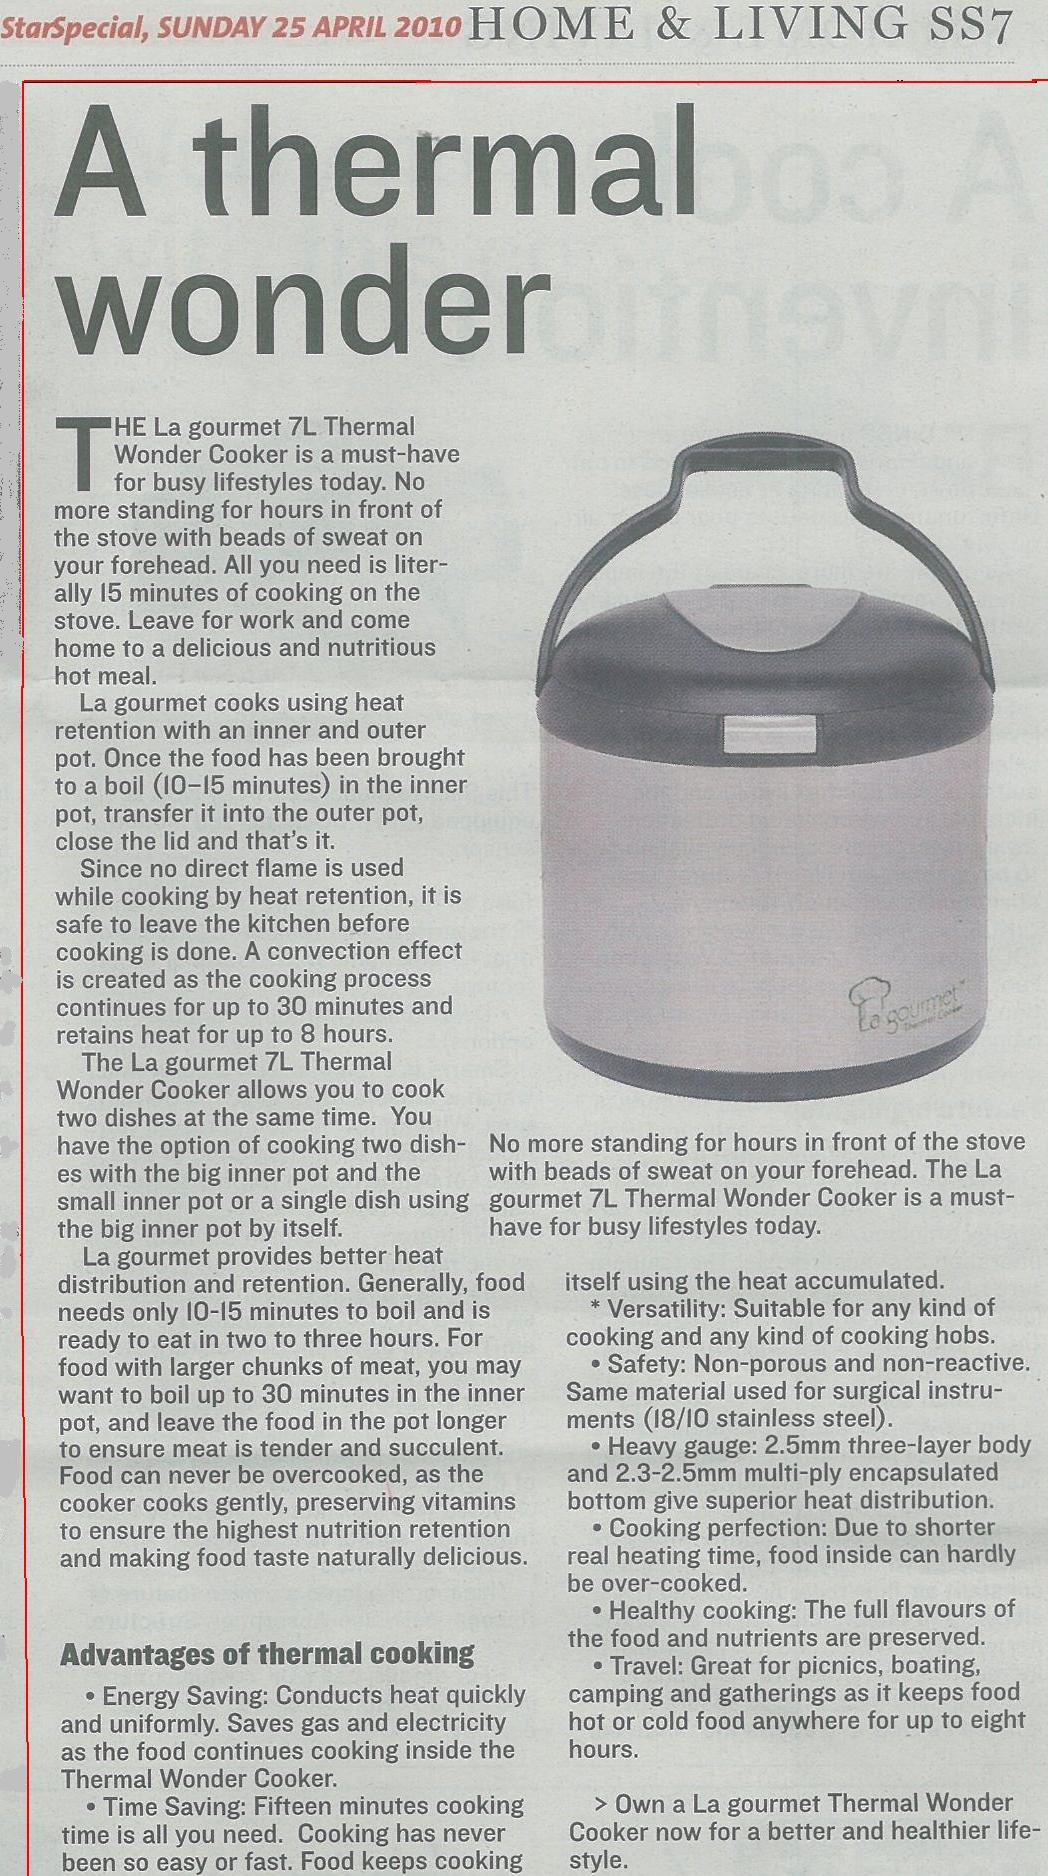 A thermal wonder The Star Newspaper Article (25th April